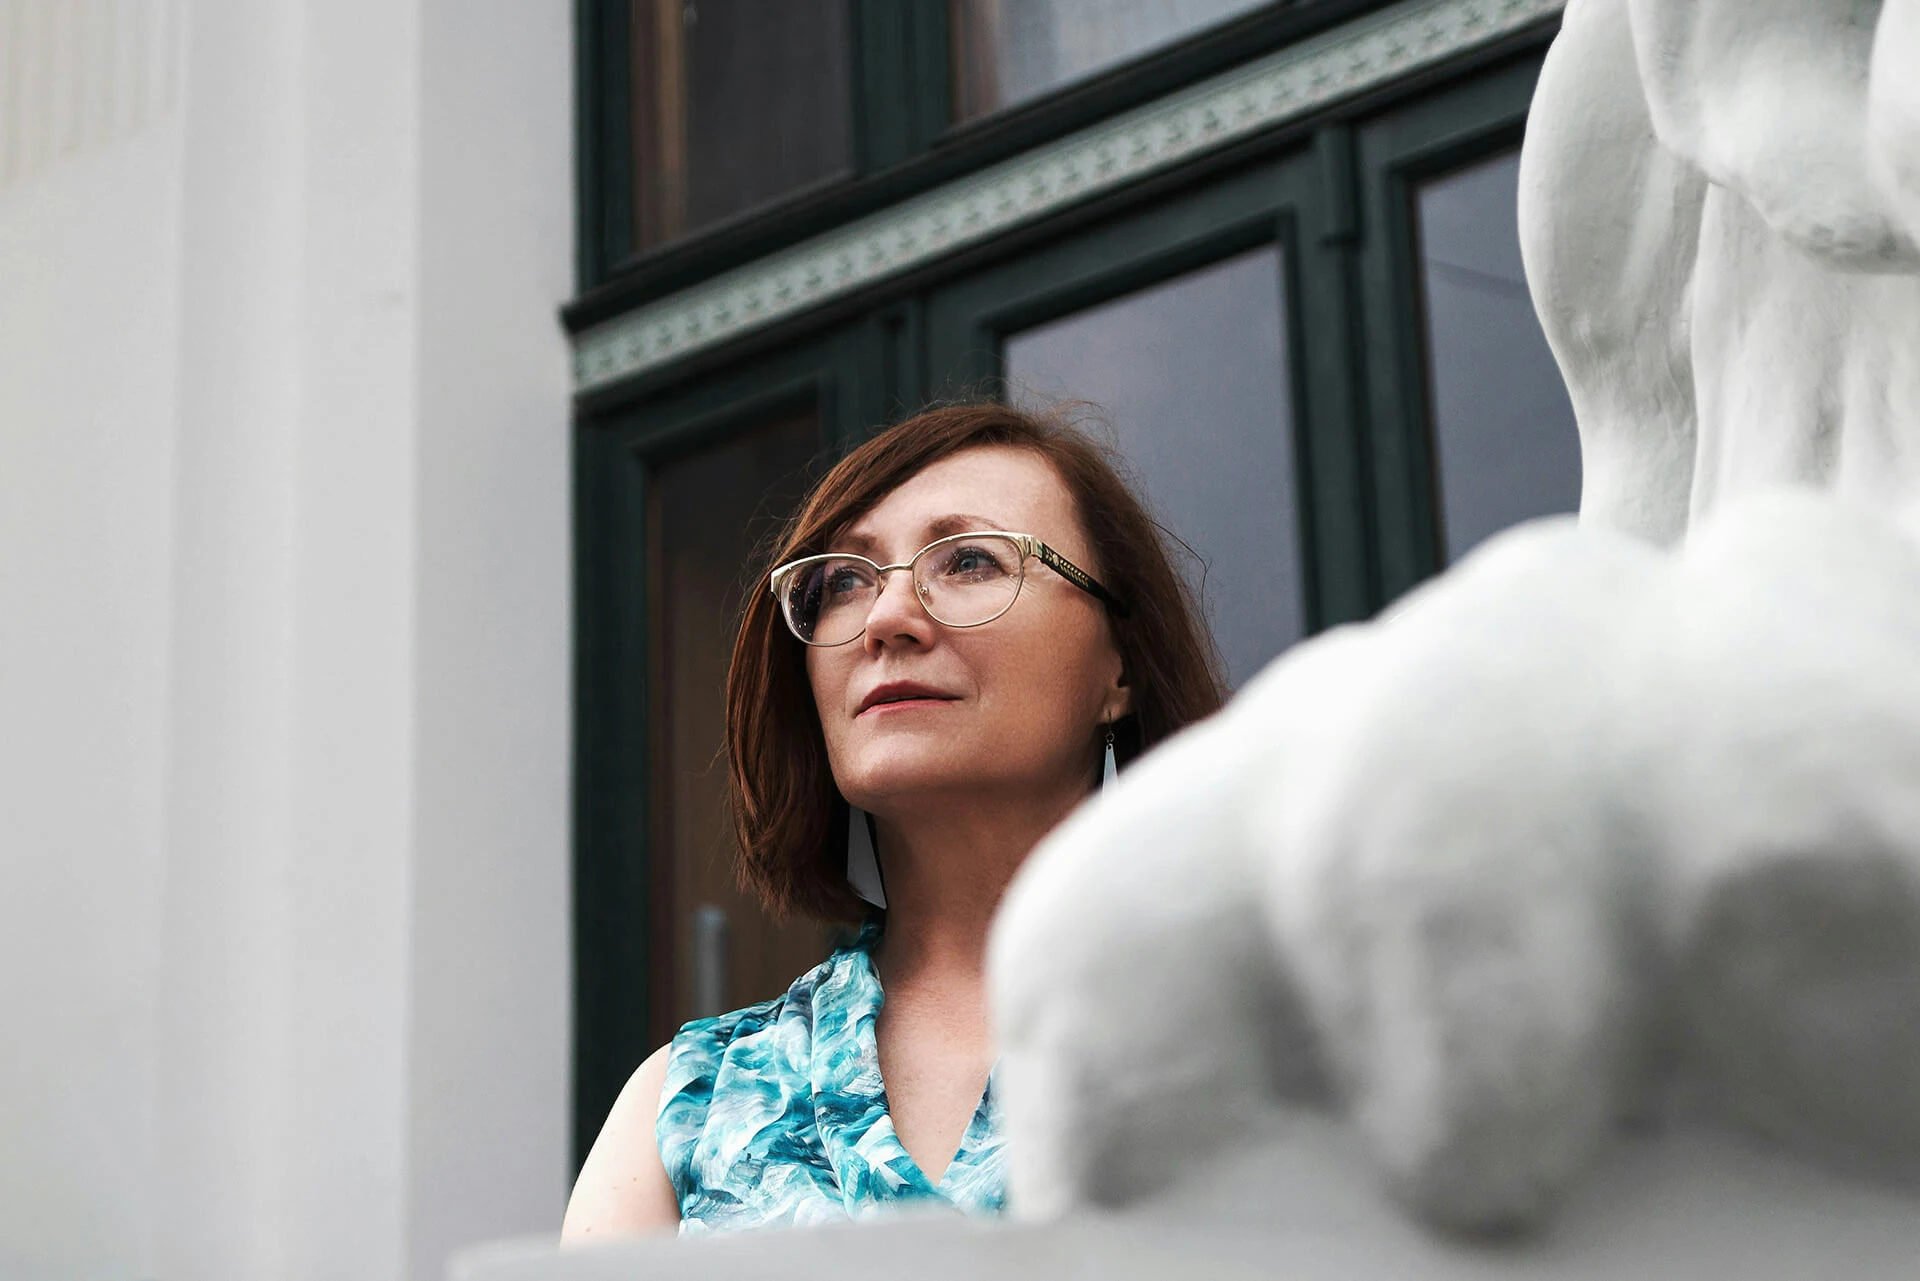 A middle-aged woman with glasses gazing off into the distance while standing on a balcony.